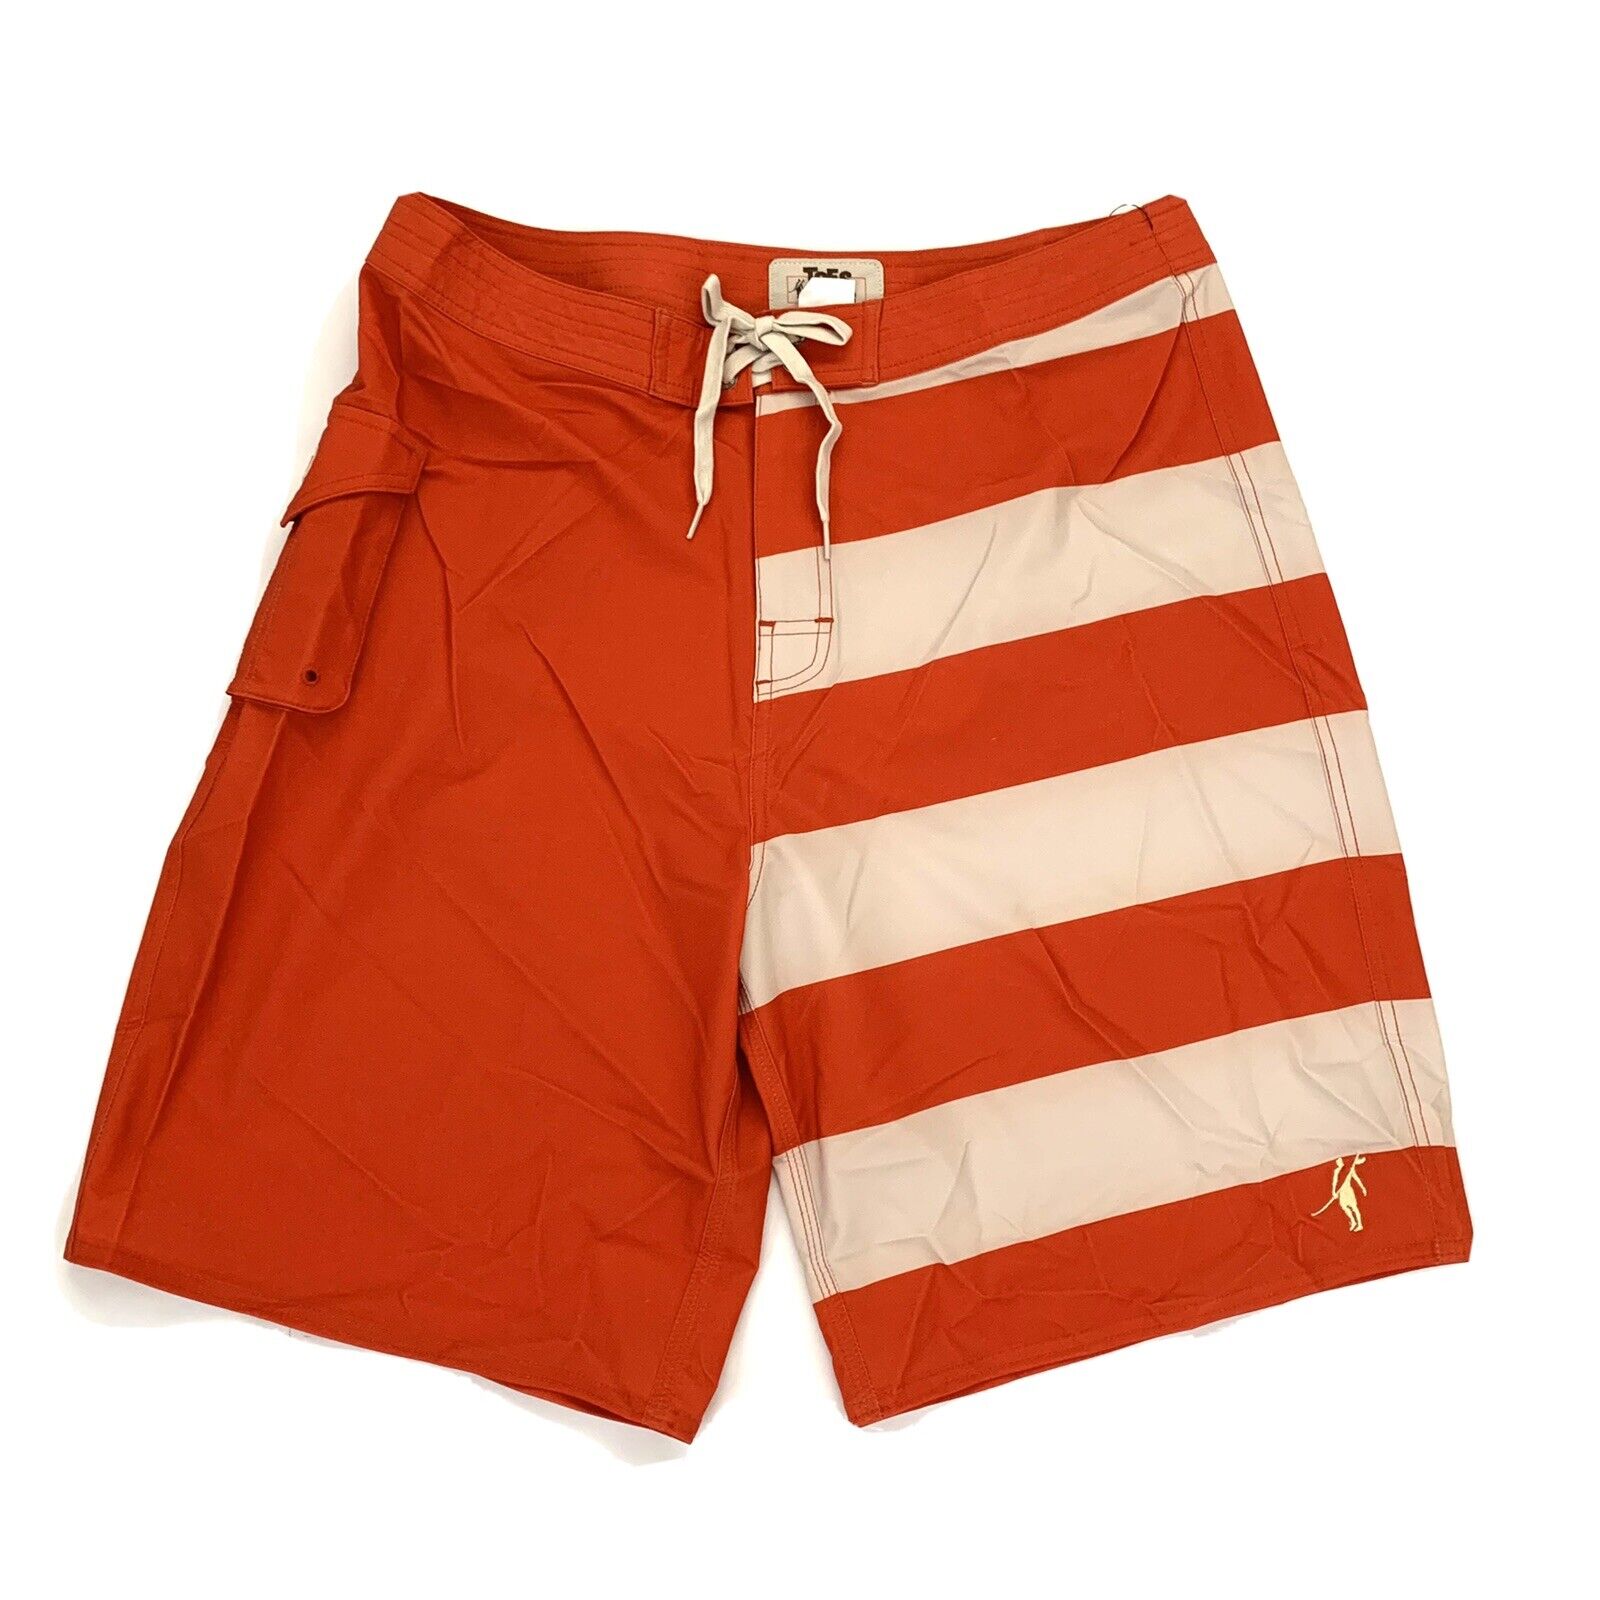 Toes On The Nose Size 34 Tan Orange/White Board Shorts Surf Skater | eBay